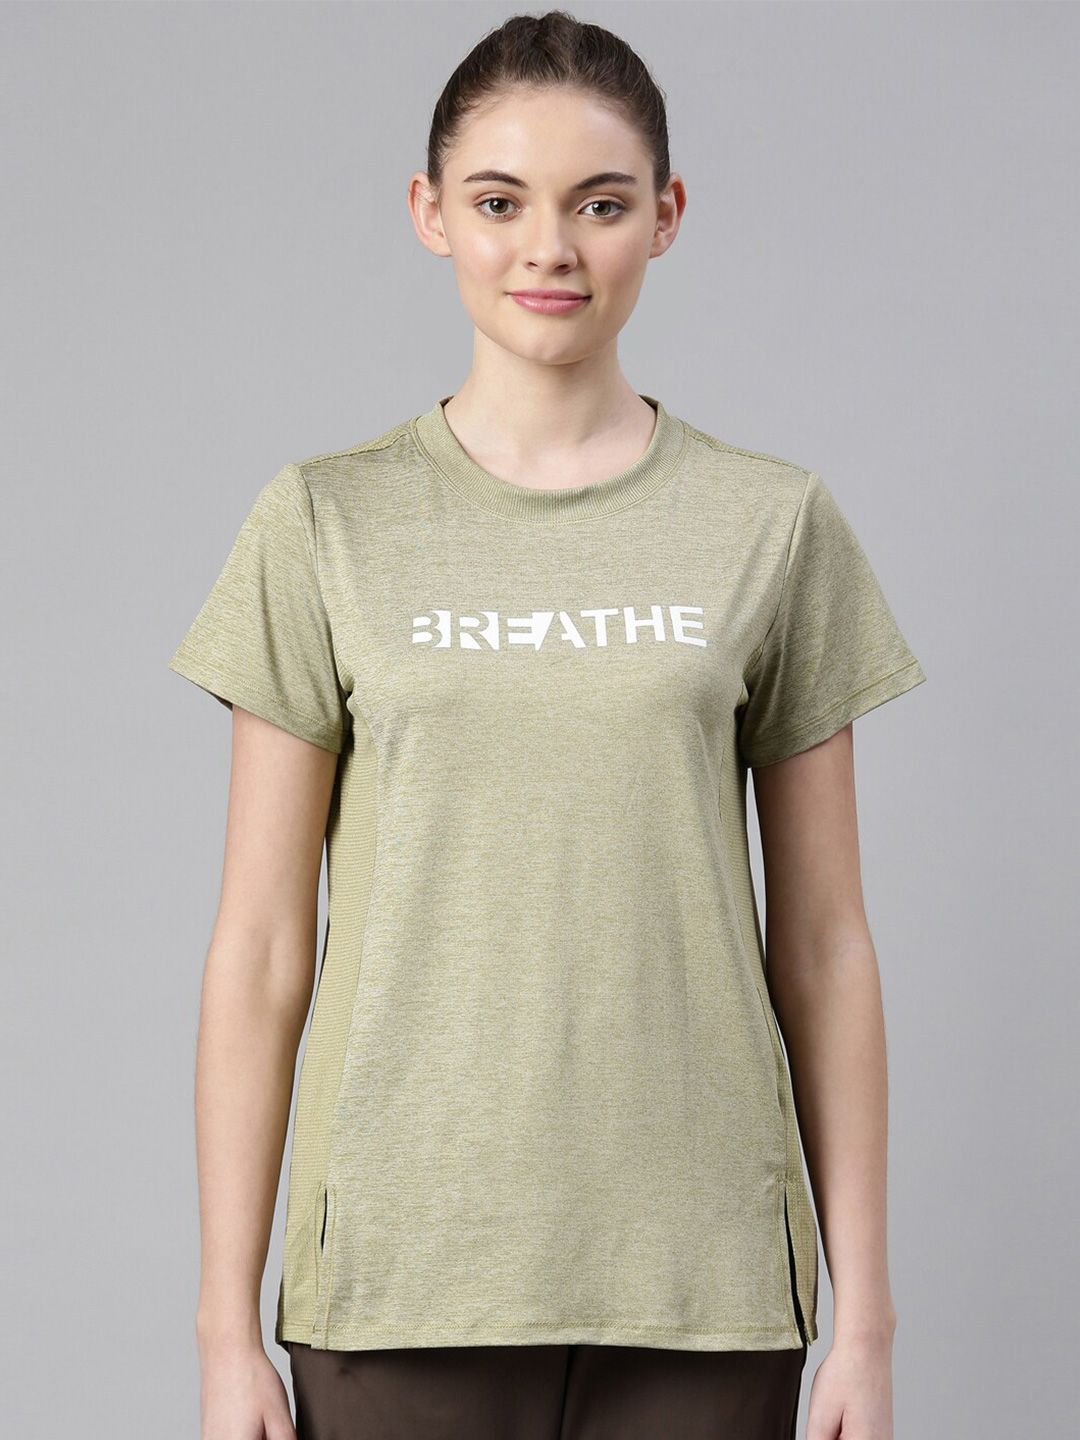 Enamor Women Olive Green Typography Printed Cotton Antimicrobial T-shirt Price in India